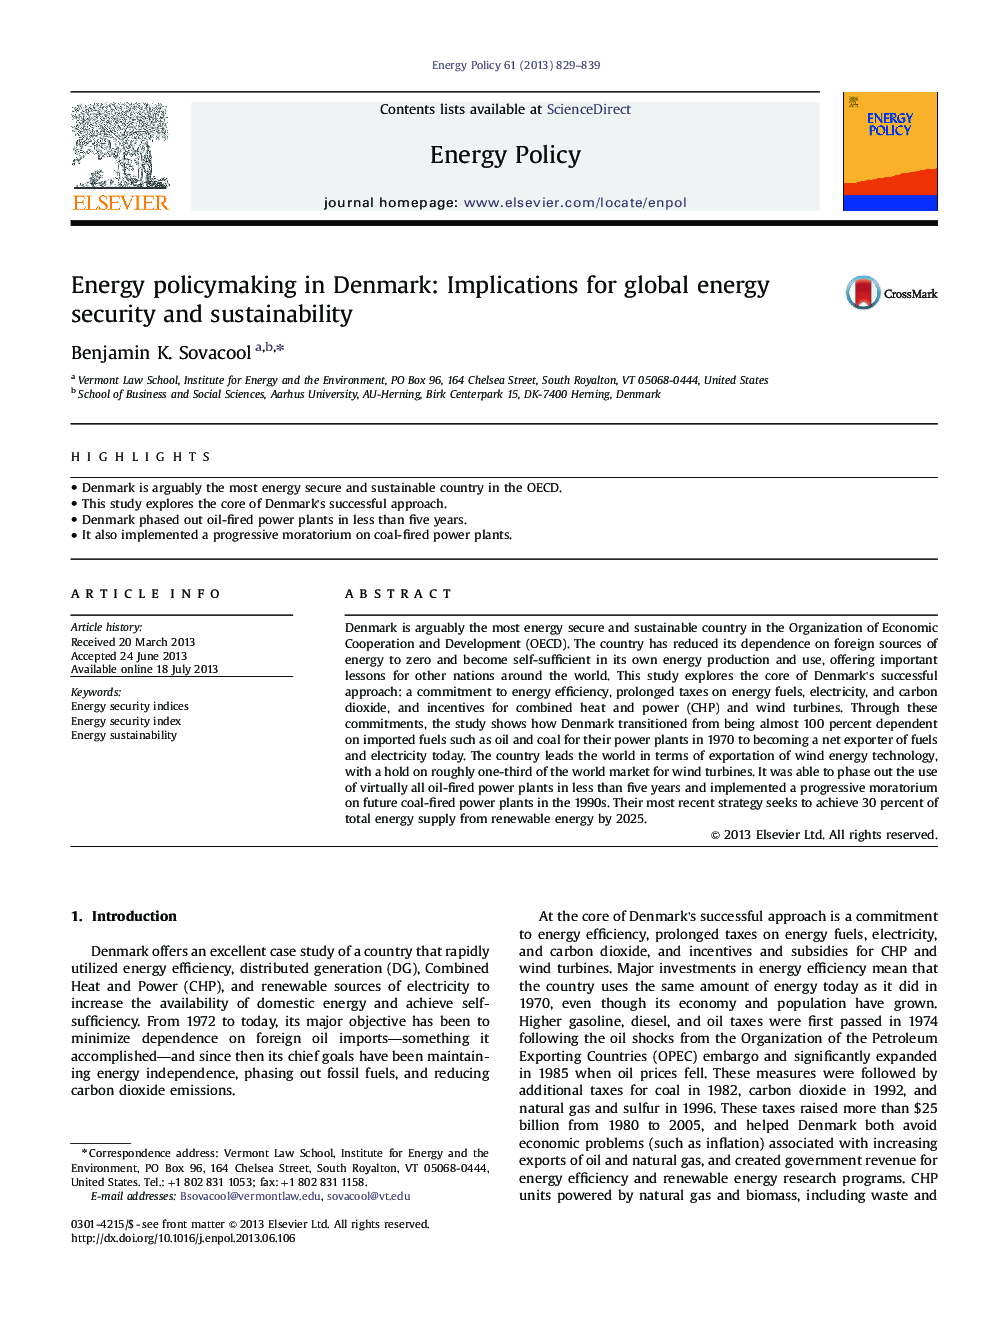 Energy policymaking in Denmark: Implications for global energy security and sustainability